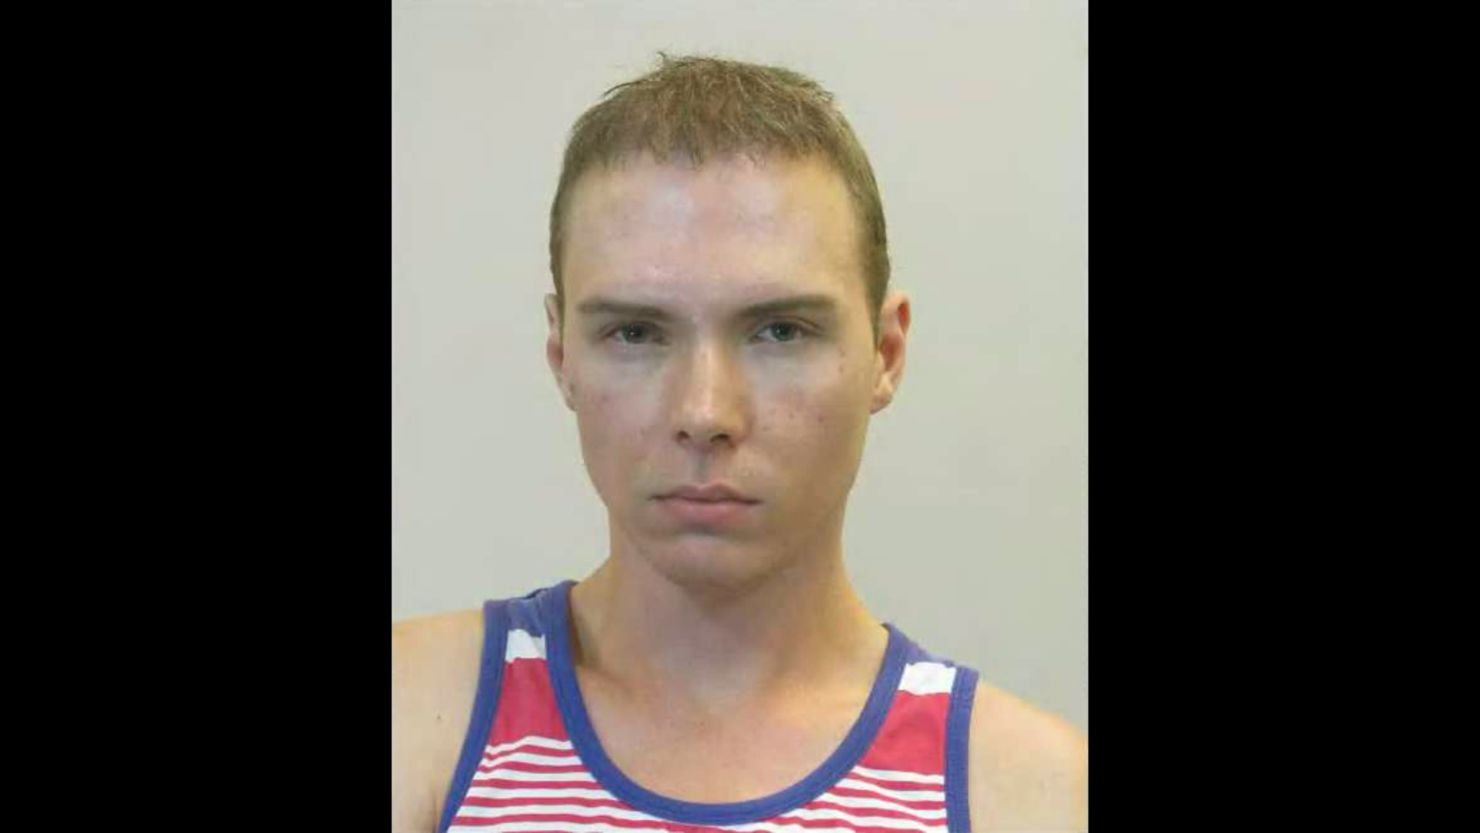 Luca Rocco Magnotta allegedly filmed himself killing and dismembering an acquaintance.  